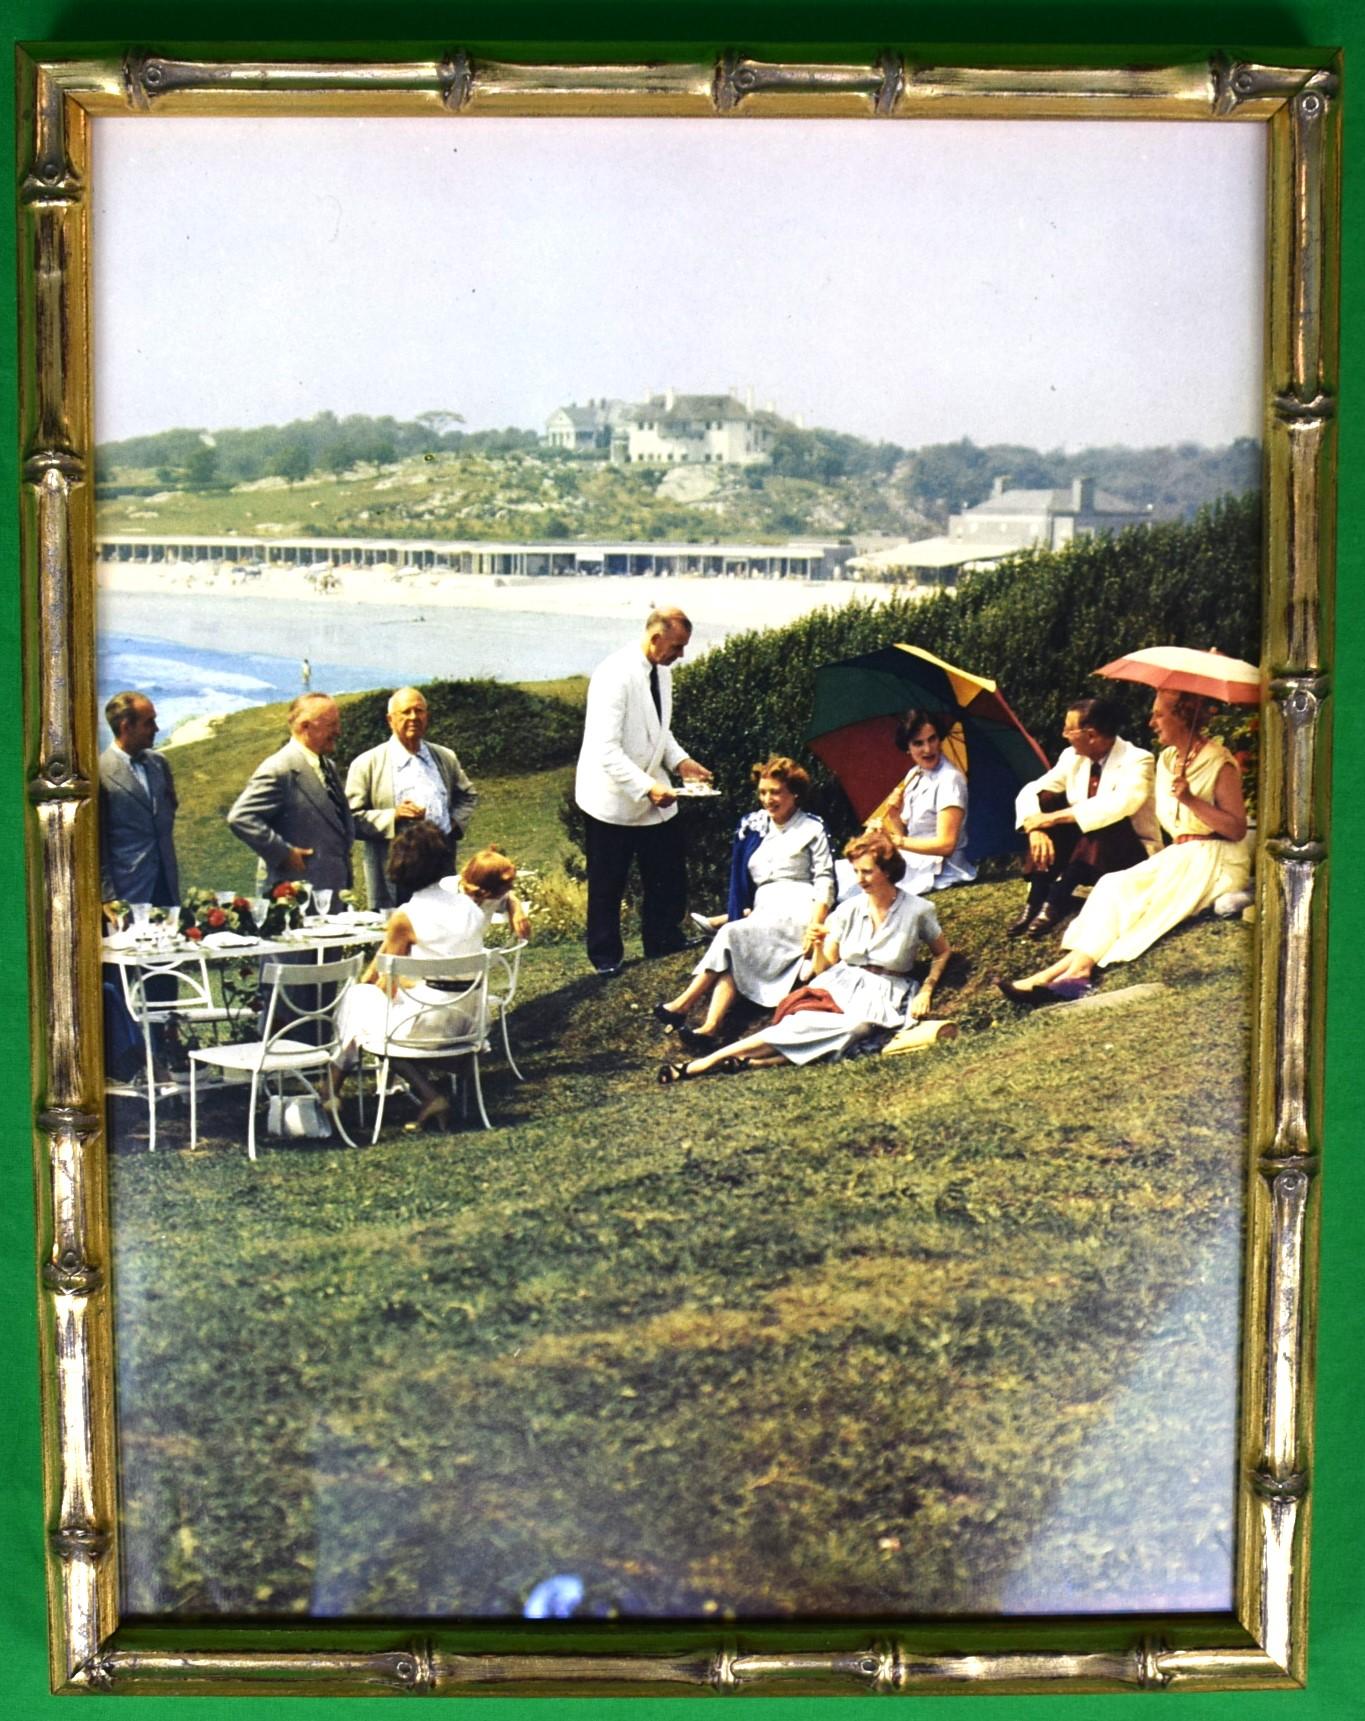 Art Sz: 13"H x 10"W

Frame Sz: 14 3/8"H x 11 1/8"W

In custom gilt bamboo frame

Original color page from Slim Aarons' iconic book "A Wonderful Time" published 1974

At James M. Becks' estate, Plaisance including such Newport notables as Mrs. Thomas